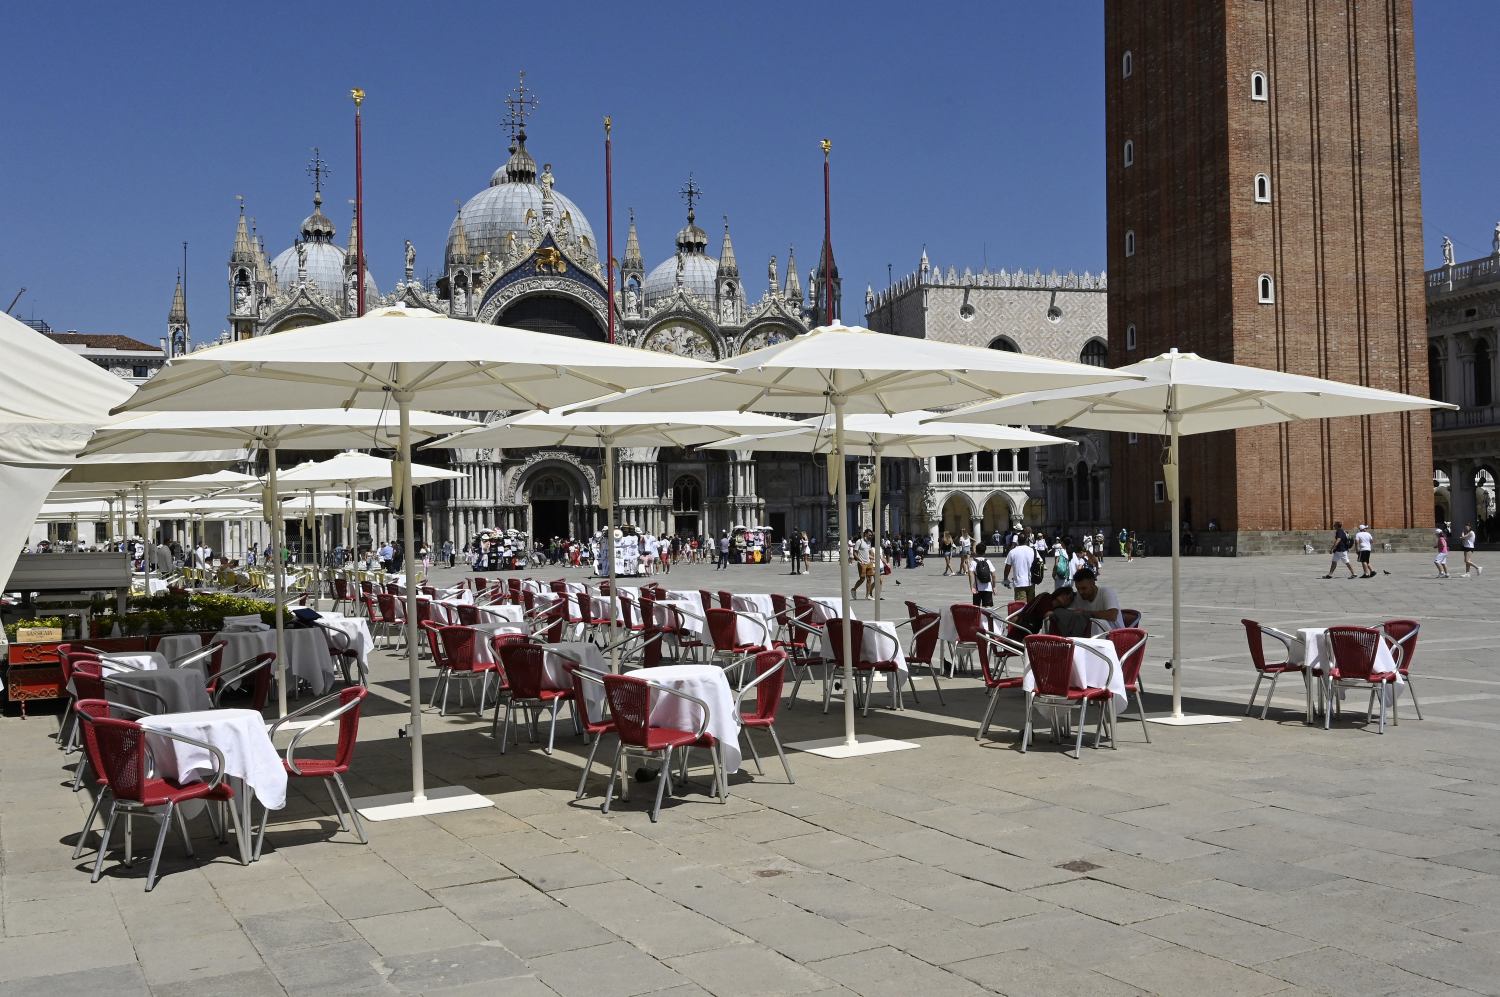 The first umbrellas were mounted that will cover the spaces in front of the premises, enlarged to facilitate the safe arrangement of the tables according to the safety rules on coronavirus, at San Marco square in Venice, Italy, on June 27, 2020. The first covers were set up in front of the Caffè Florian. Then the workers' teams moved on to Quadri, Lavena and will conclude at the Aurora and Chioggia cafes, in front of Palazzo Ducale. The artifacts are all the same, with a square plan and the same ivory white color as the "lunettes" that cover the arches of the Procuratie. The design, agreed with the Traders Association of Piazza San Marco, is inspired by the canvases depicted in the paintings by Canaletto dedicated to the Marcian area. The umbrellas will remain until October 31, a grant from the Superintendency, which in the past had refused similar proposals, to facilitate the cafes that are trying to recover from closure. Photo by MBtarget / IPA/ABACAPRESS.COMNo Use Italy.